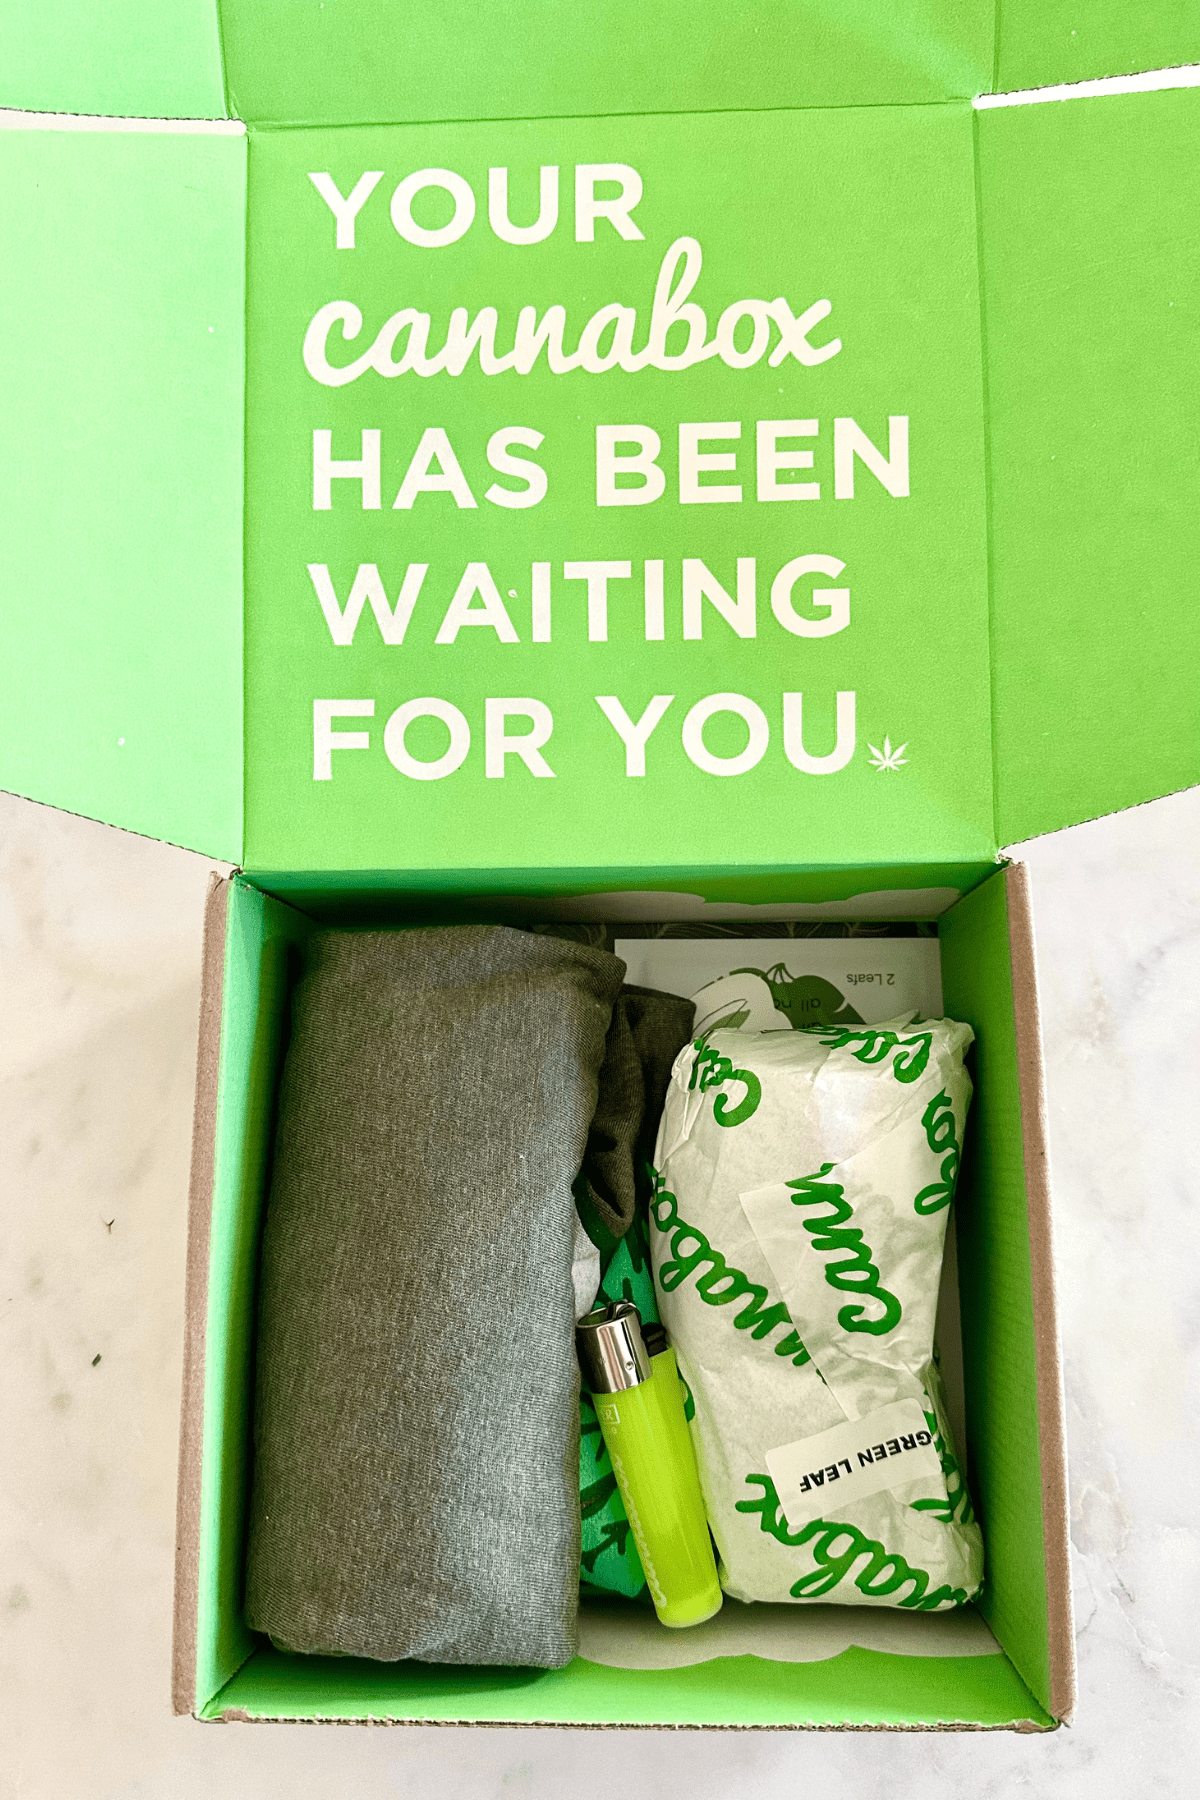 A picture of a cannabox open with items like a lighter and a shirt inside.